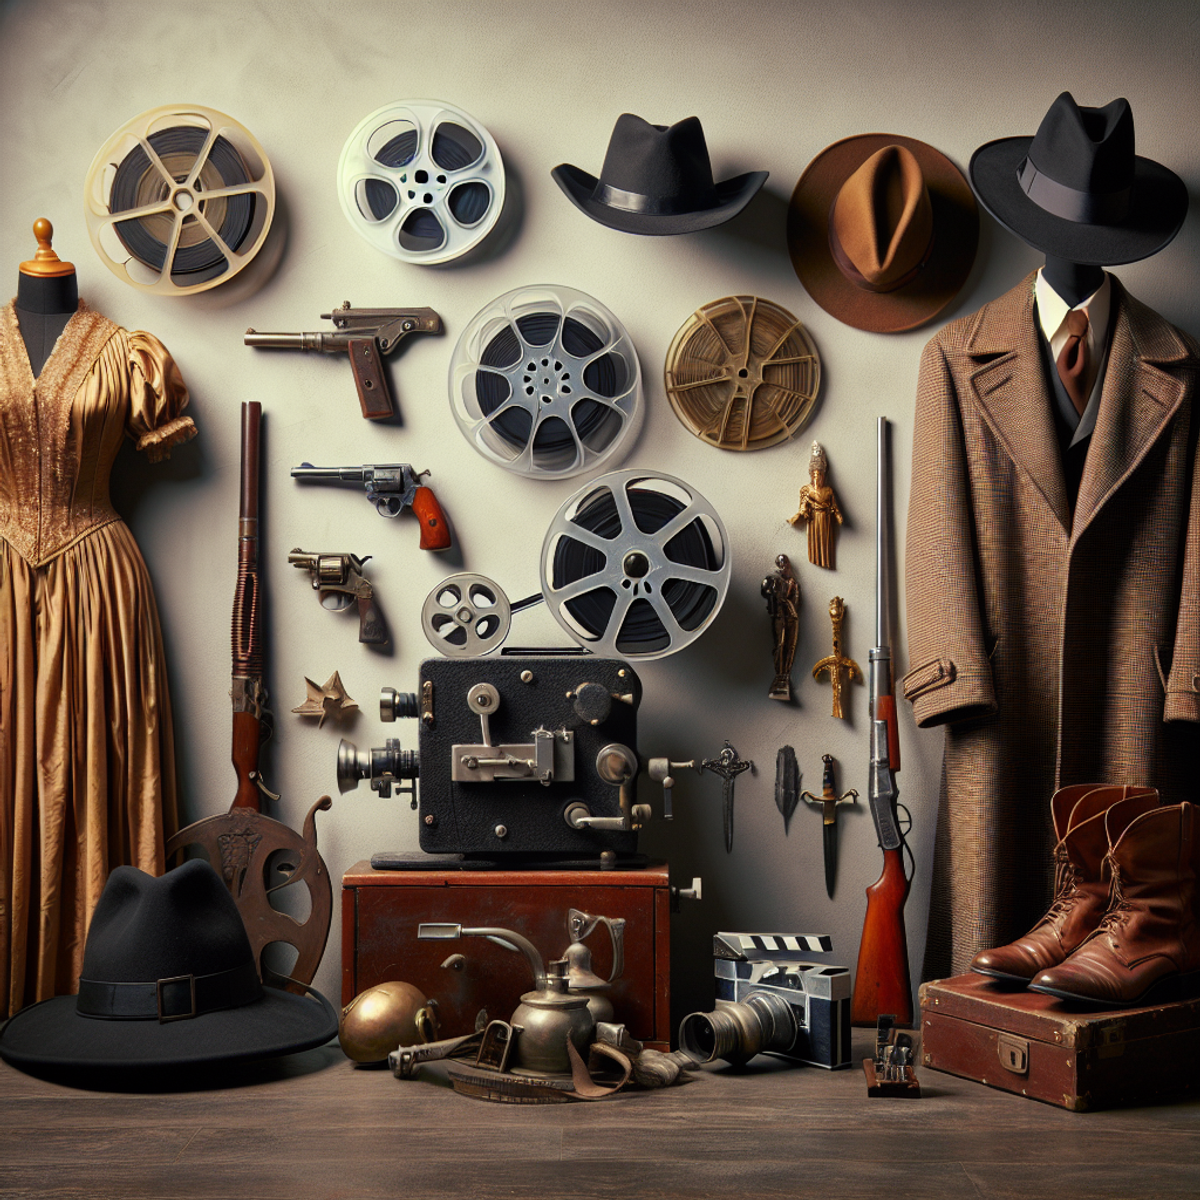 A display of iconic movie props and costumes including a vintage film projector, film reels, a romantic period dress, a cowboy hat, a detective's trench coat, an antique pistol, a knight's sword, and a wizard's hat.